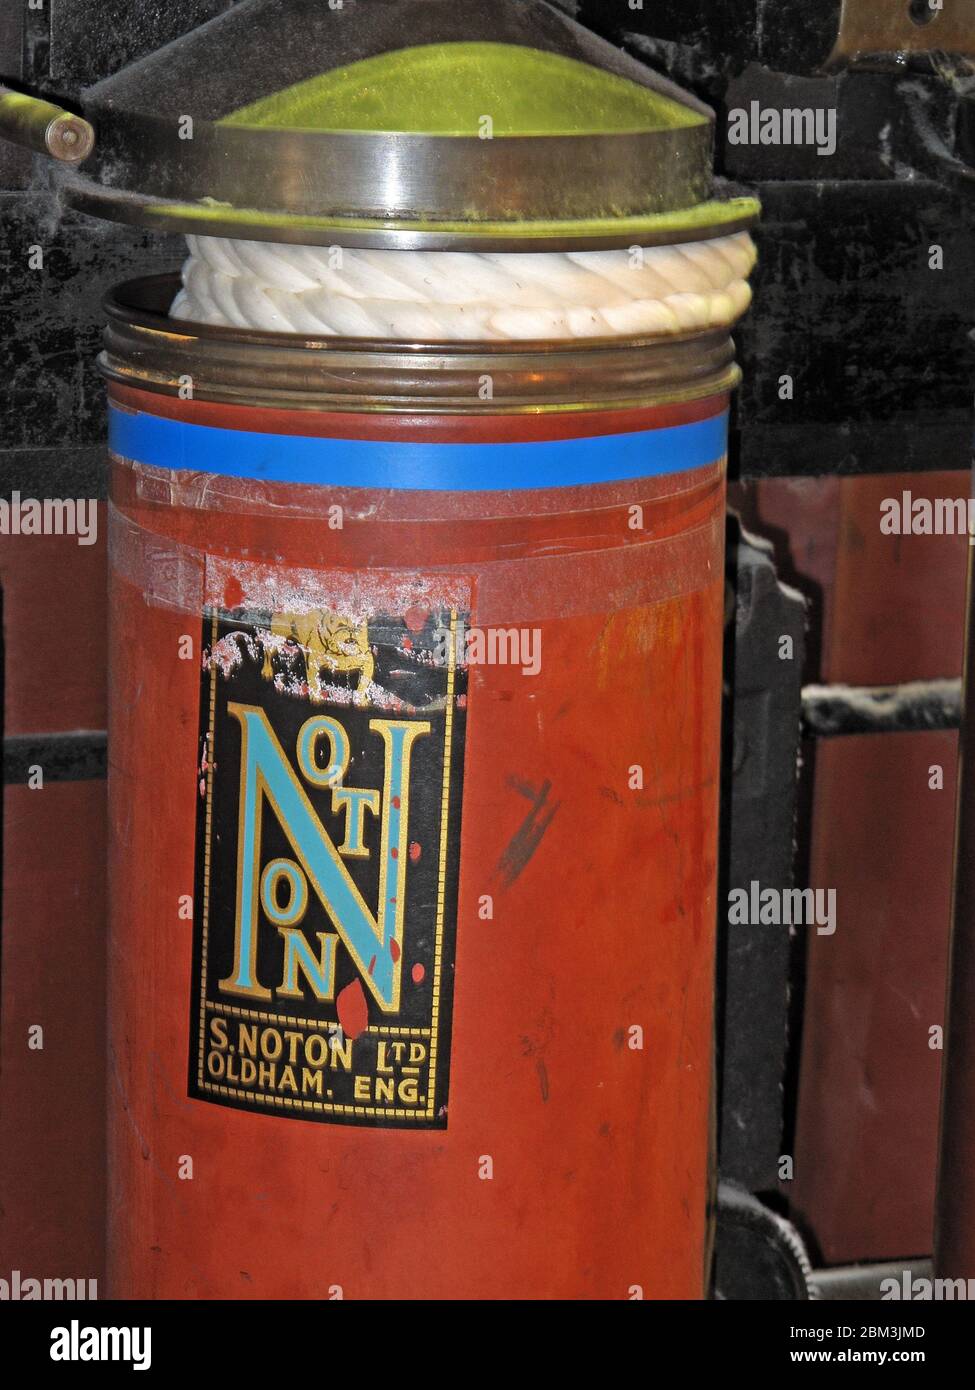 S. Noton Limited, Oldham, canister for holding cotton,textile bin, Manchester cotton mill,Lancashire, England, UK Stock Photo